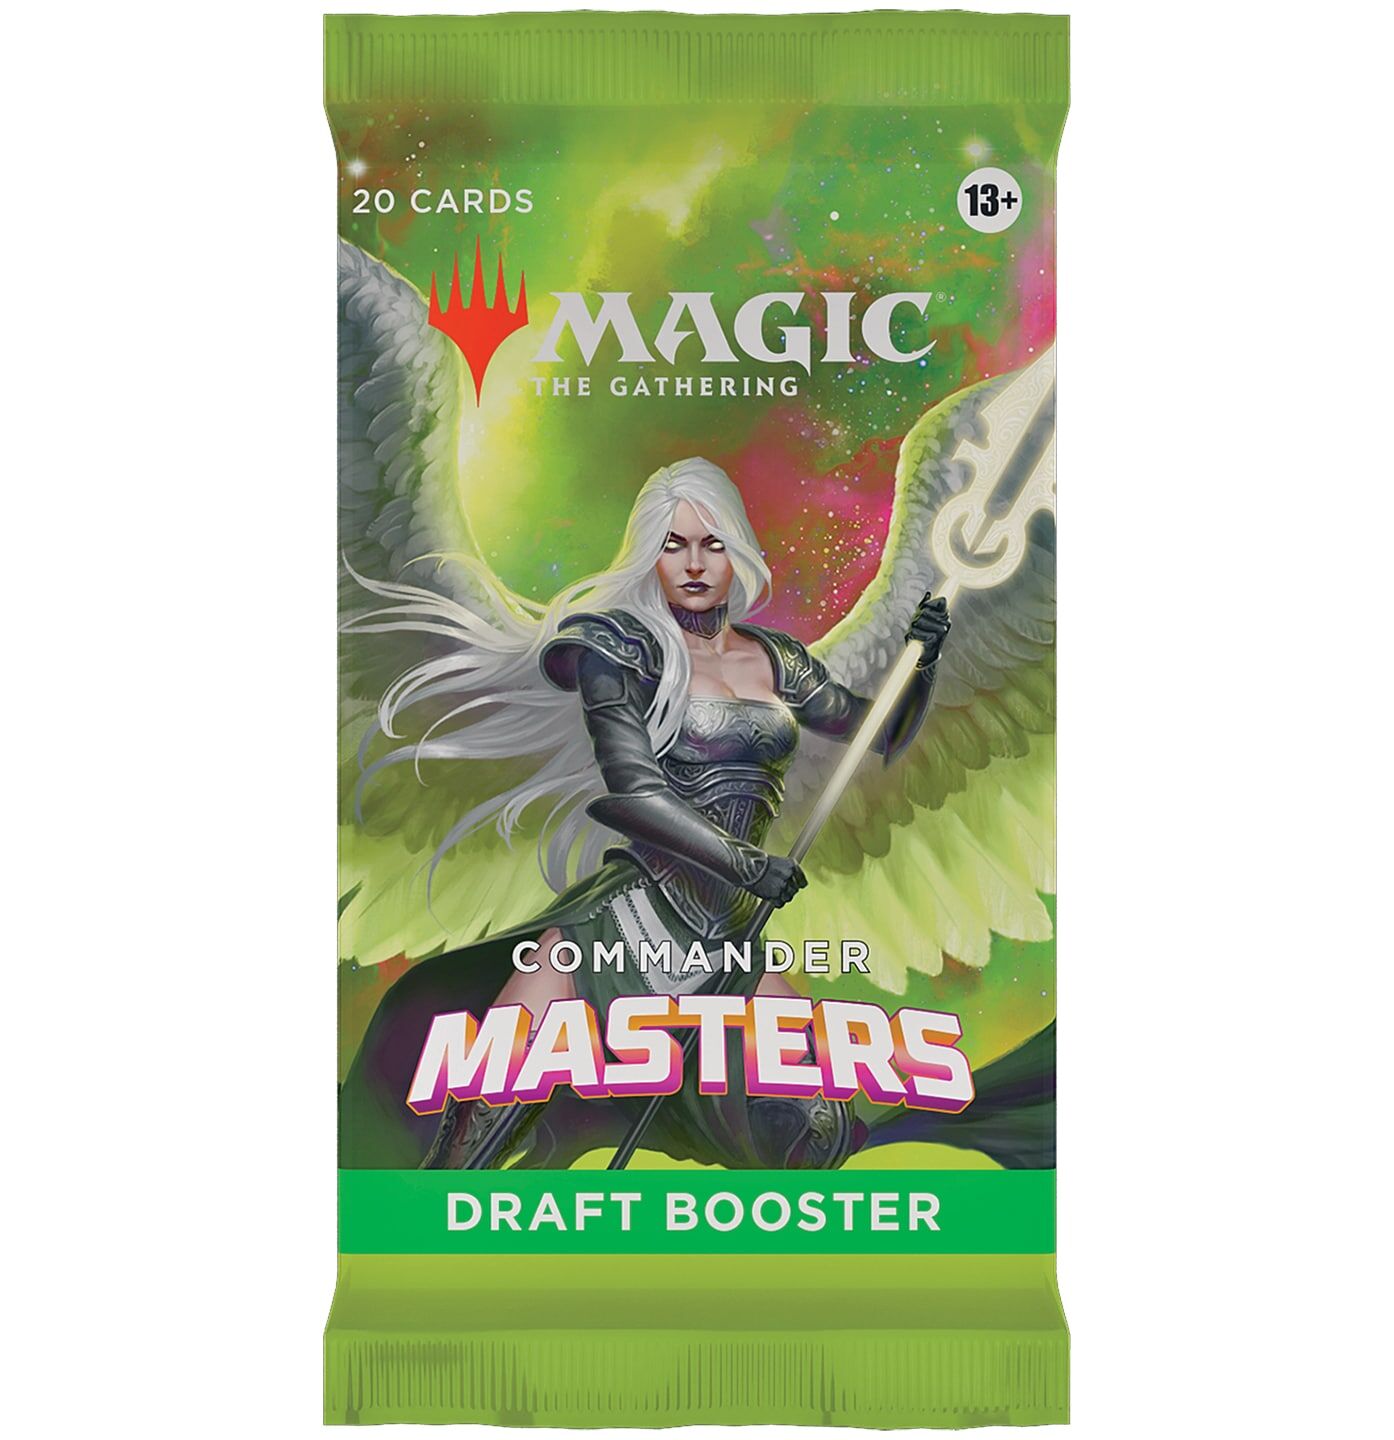 Commander Masters Draft Booster - Magic the Gathering - EN